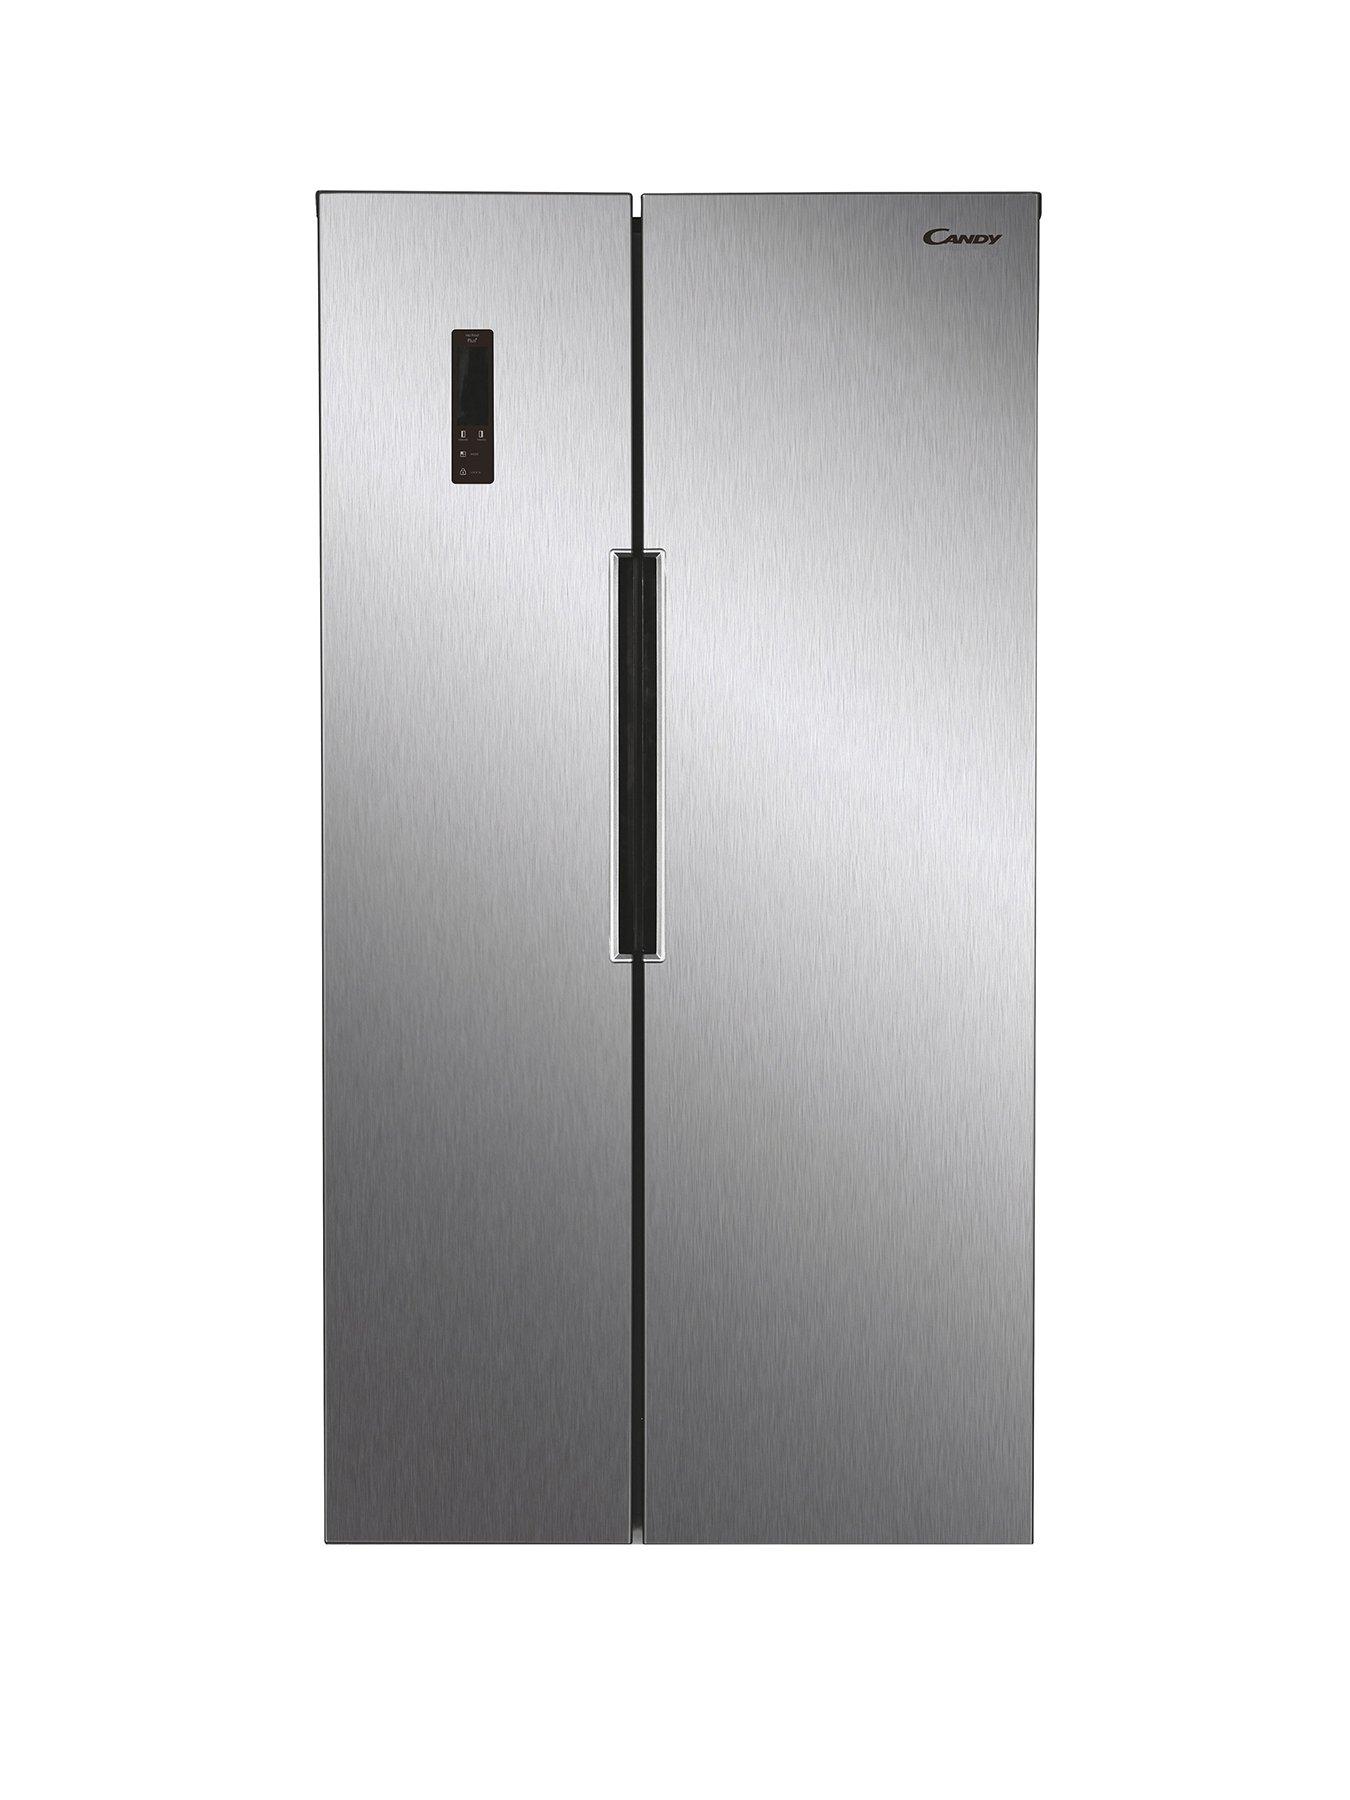 Product photograph of Candy Chsbsv5172xkn Slim Depth Total No Frost American Fridge Freezer - Stainless Steel from very.co.uk